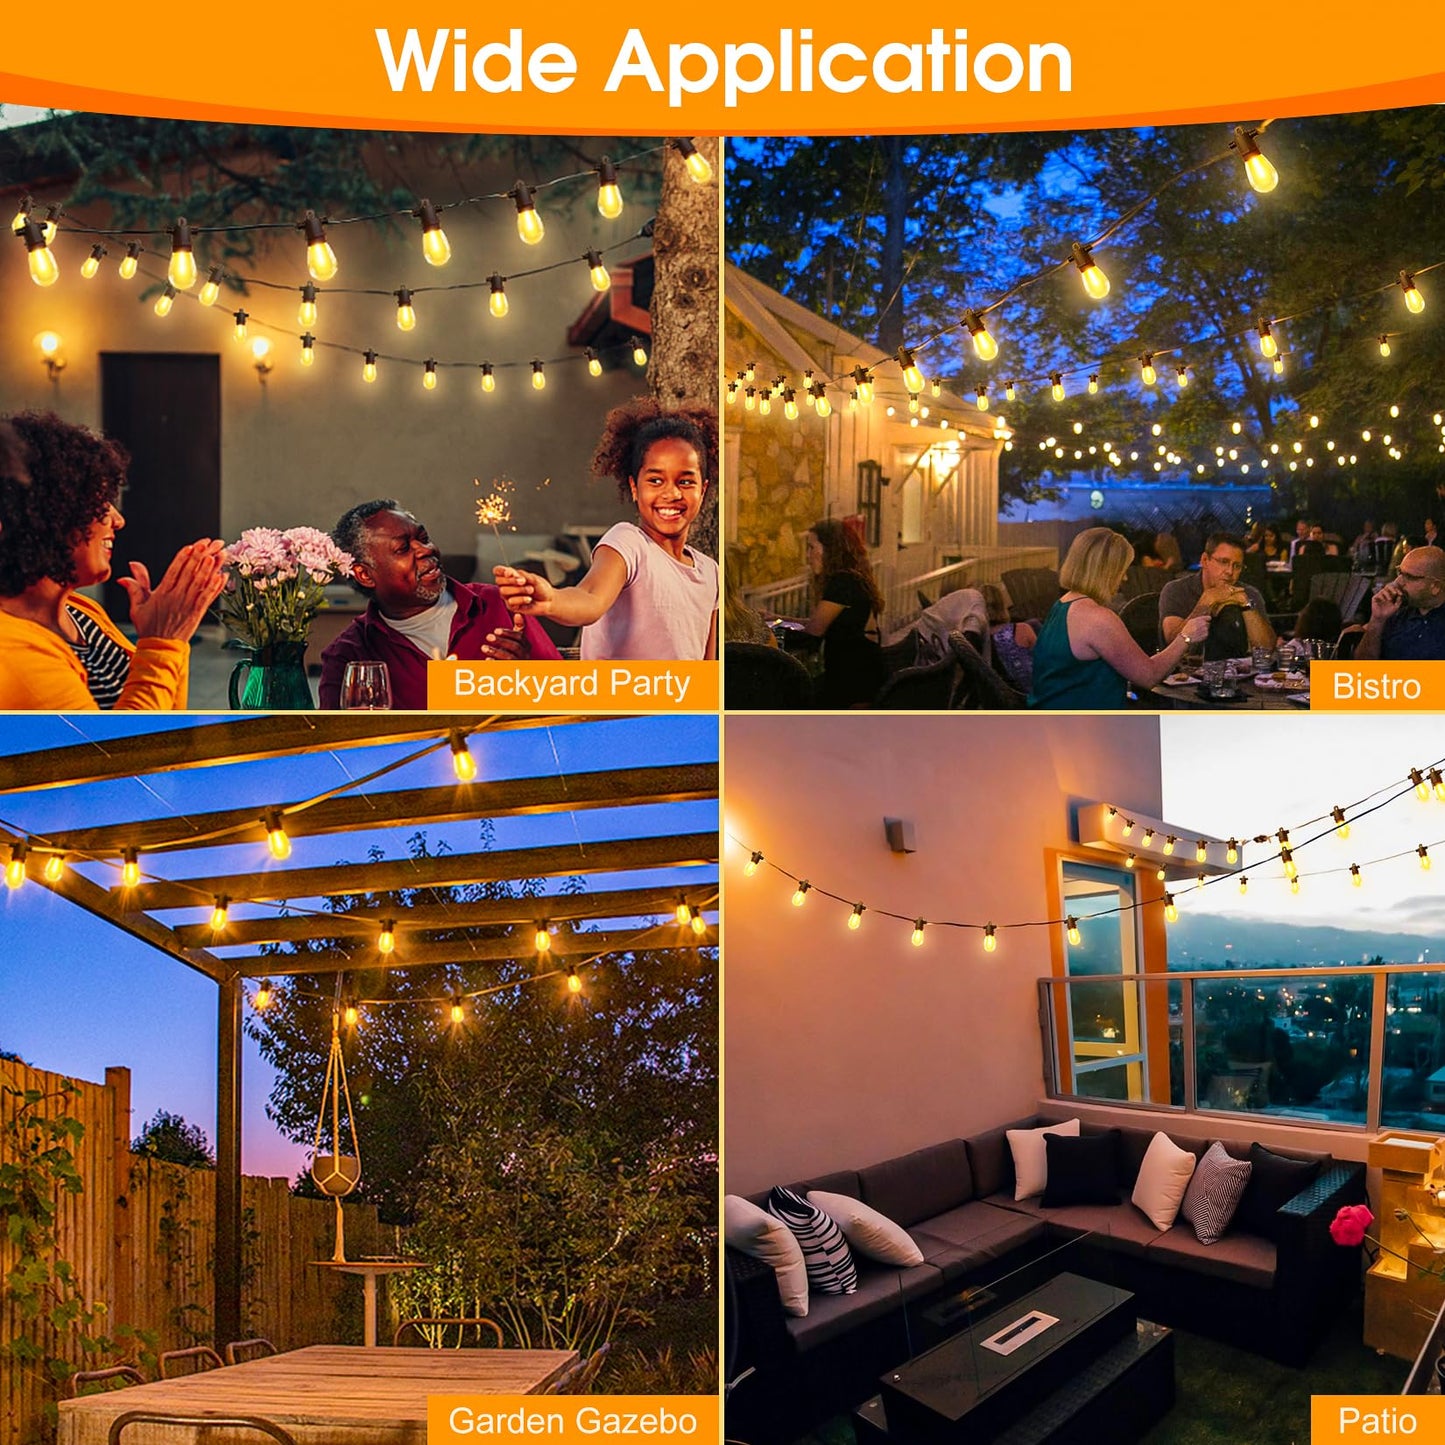 Outdoor String Lights with Remote - Dimmable 100FT IP65 Waterproof Patio Lights with Edison Bulbs Hanging Lights Outside for Backyard Garden Porch Deck Balcony